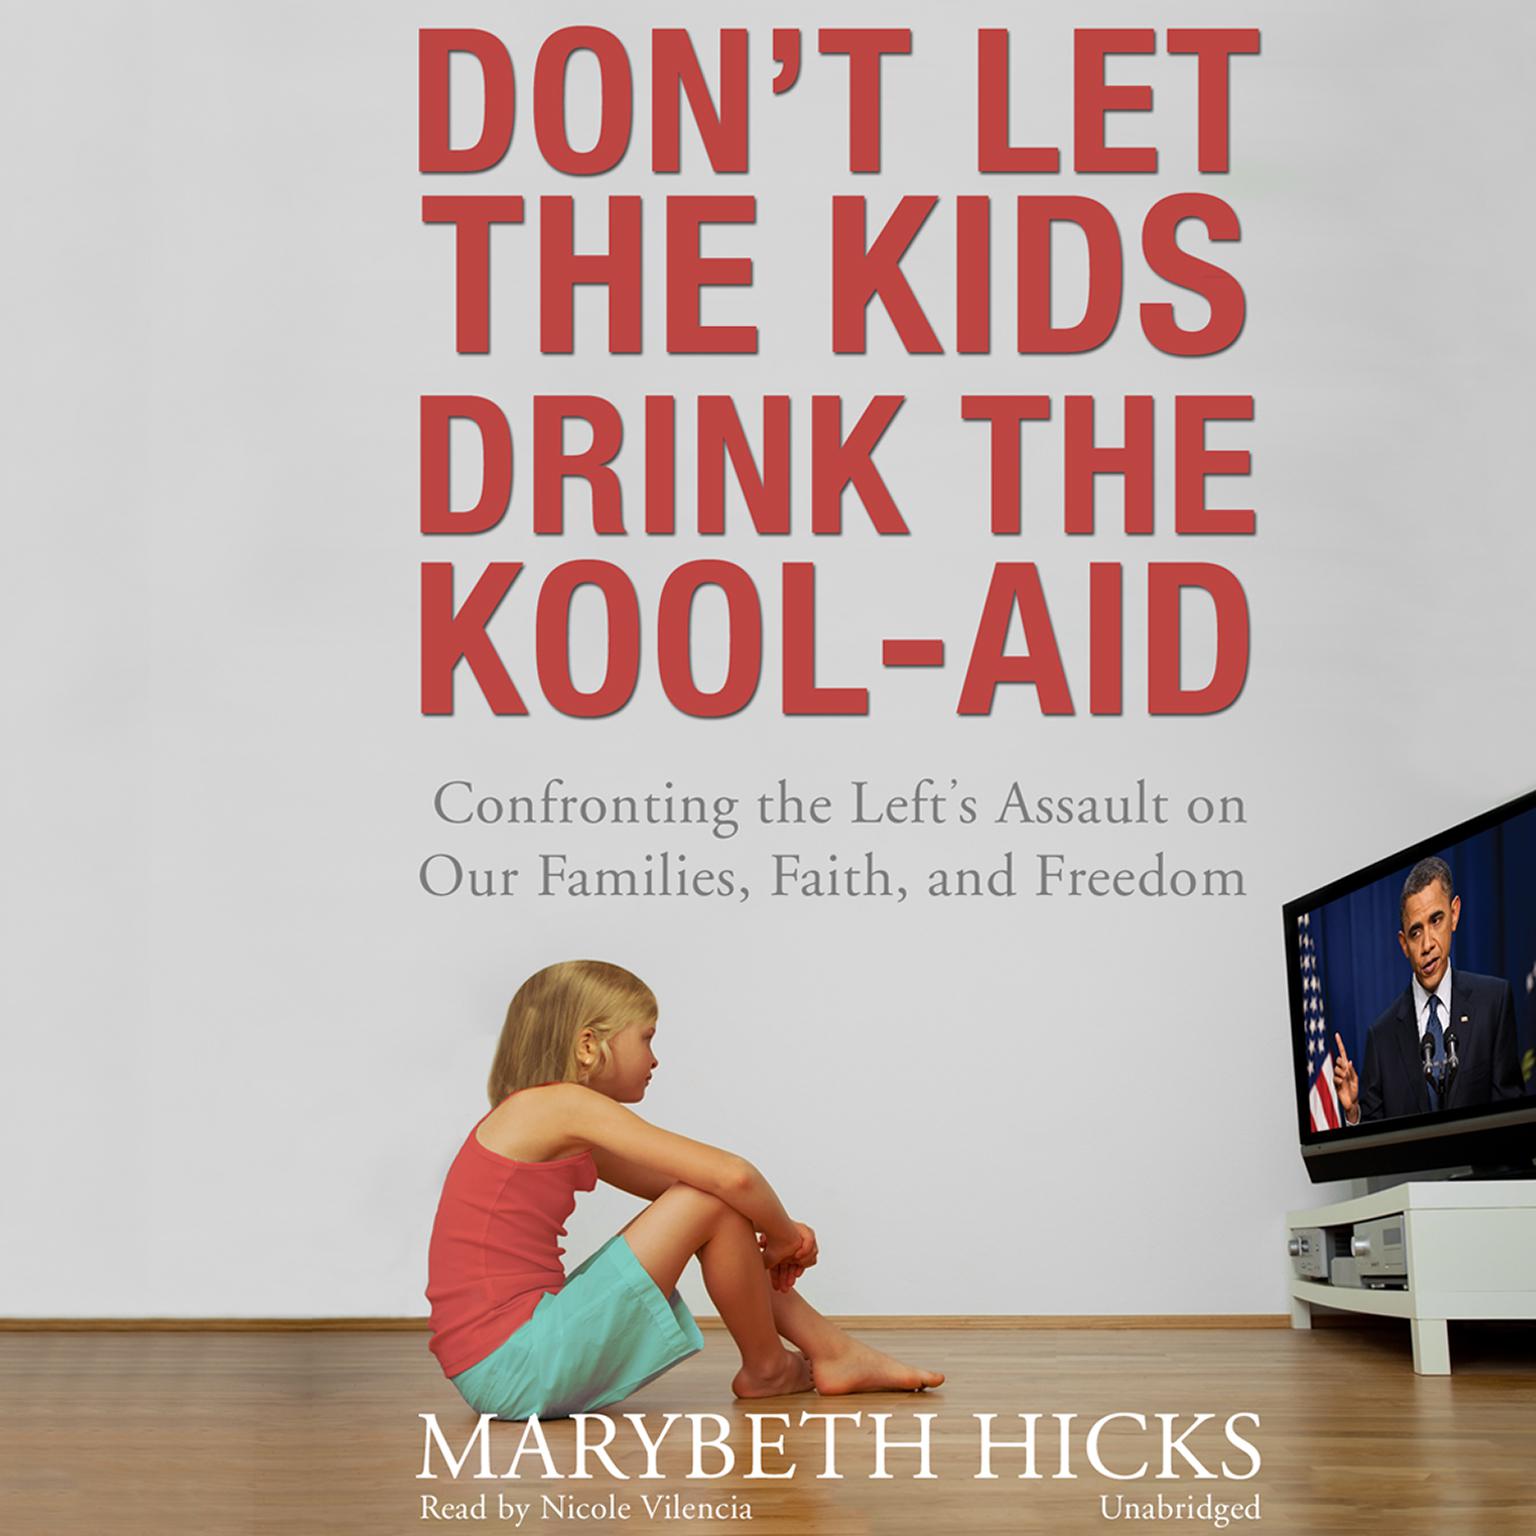 Don’t Let the Kids Drink the Kool-Aid: Confronting the Left’s Assault on Our Families, Faith, and Freedom Audiobook, by Marybeth Hicks